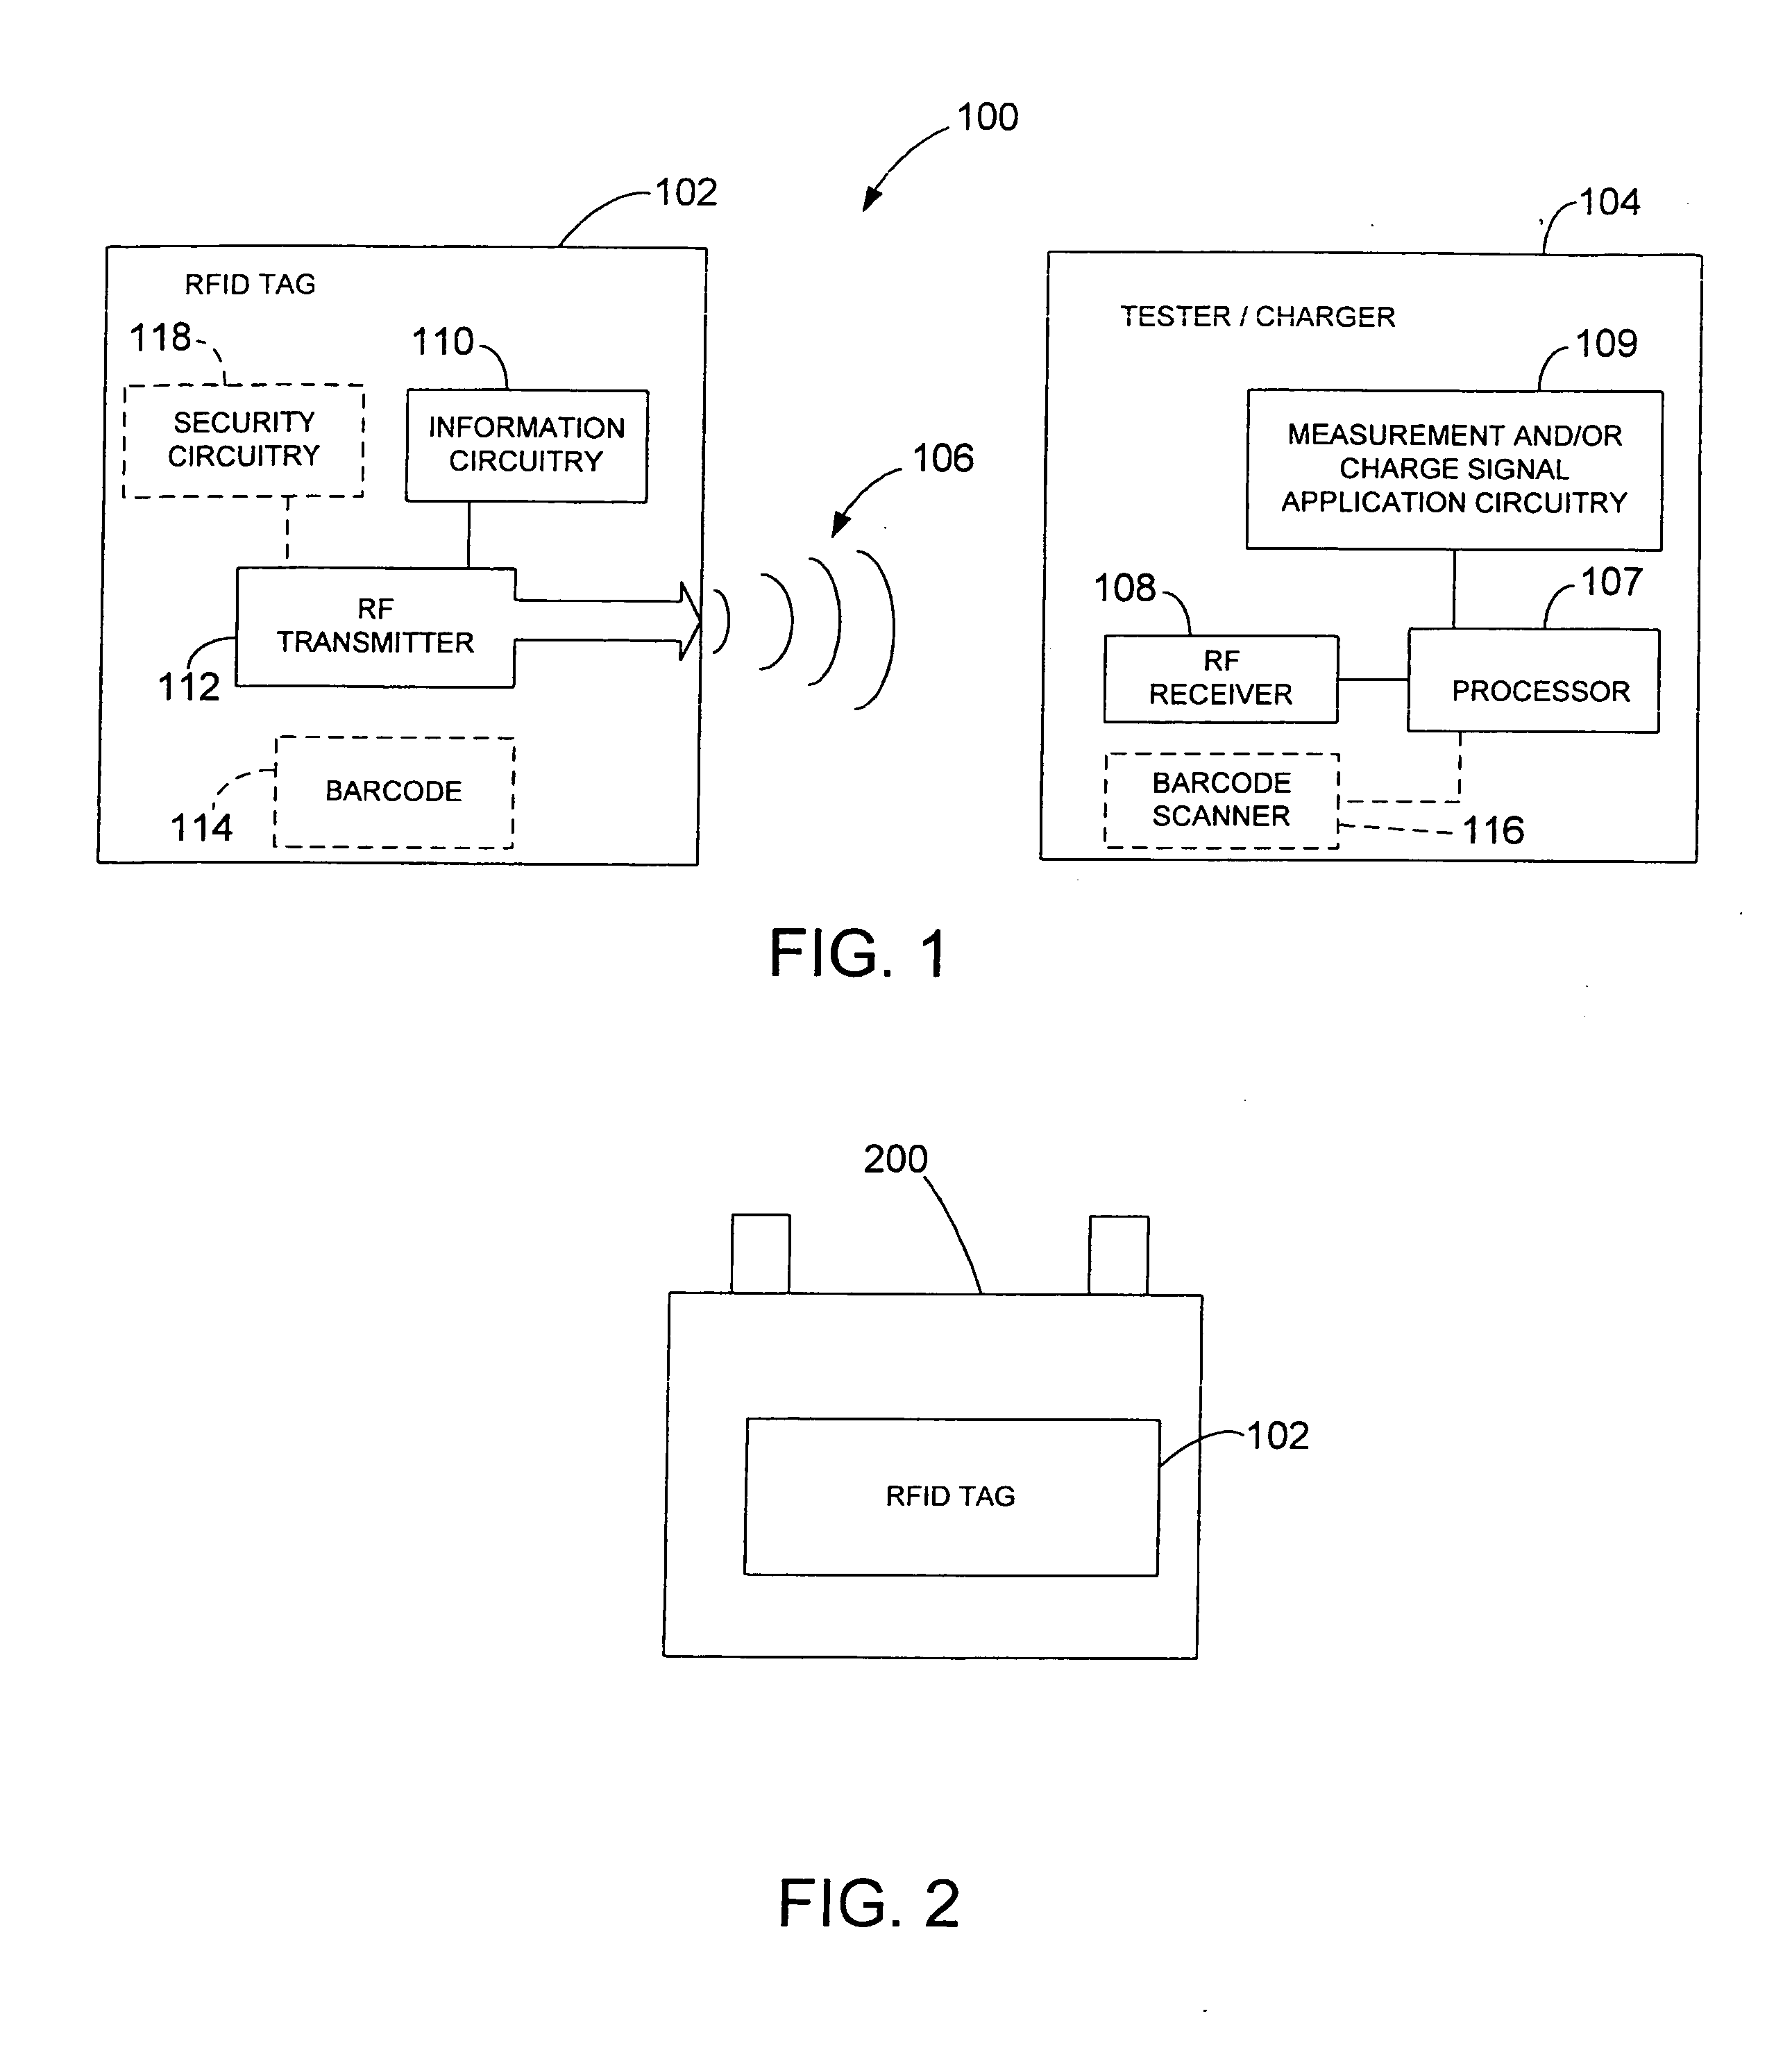 System for automatically gathering battery information for use during battery testing/charging